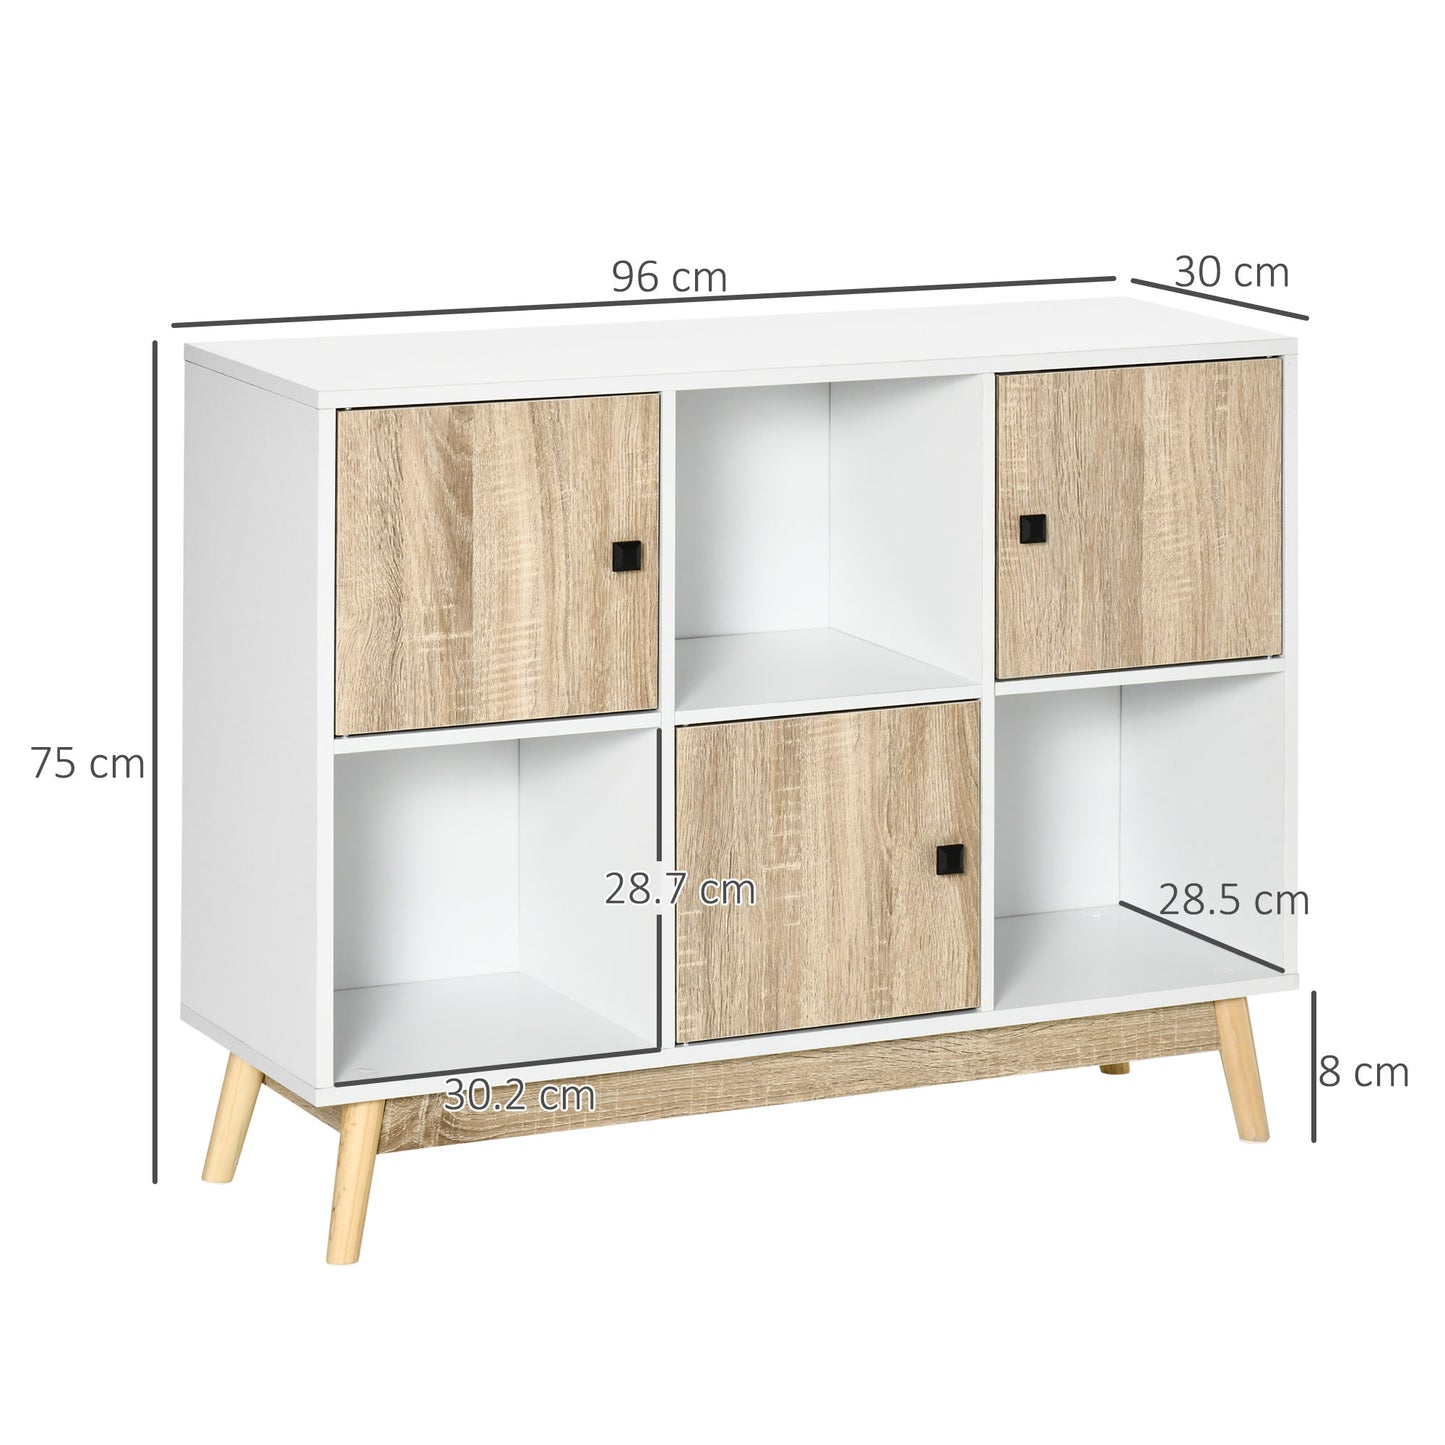 HOMCOM Storage Cabinet, Bookcase, Display Shelf with 6 Storage Cubes & Doors for Dining Room, Living Room, Natural